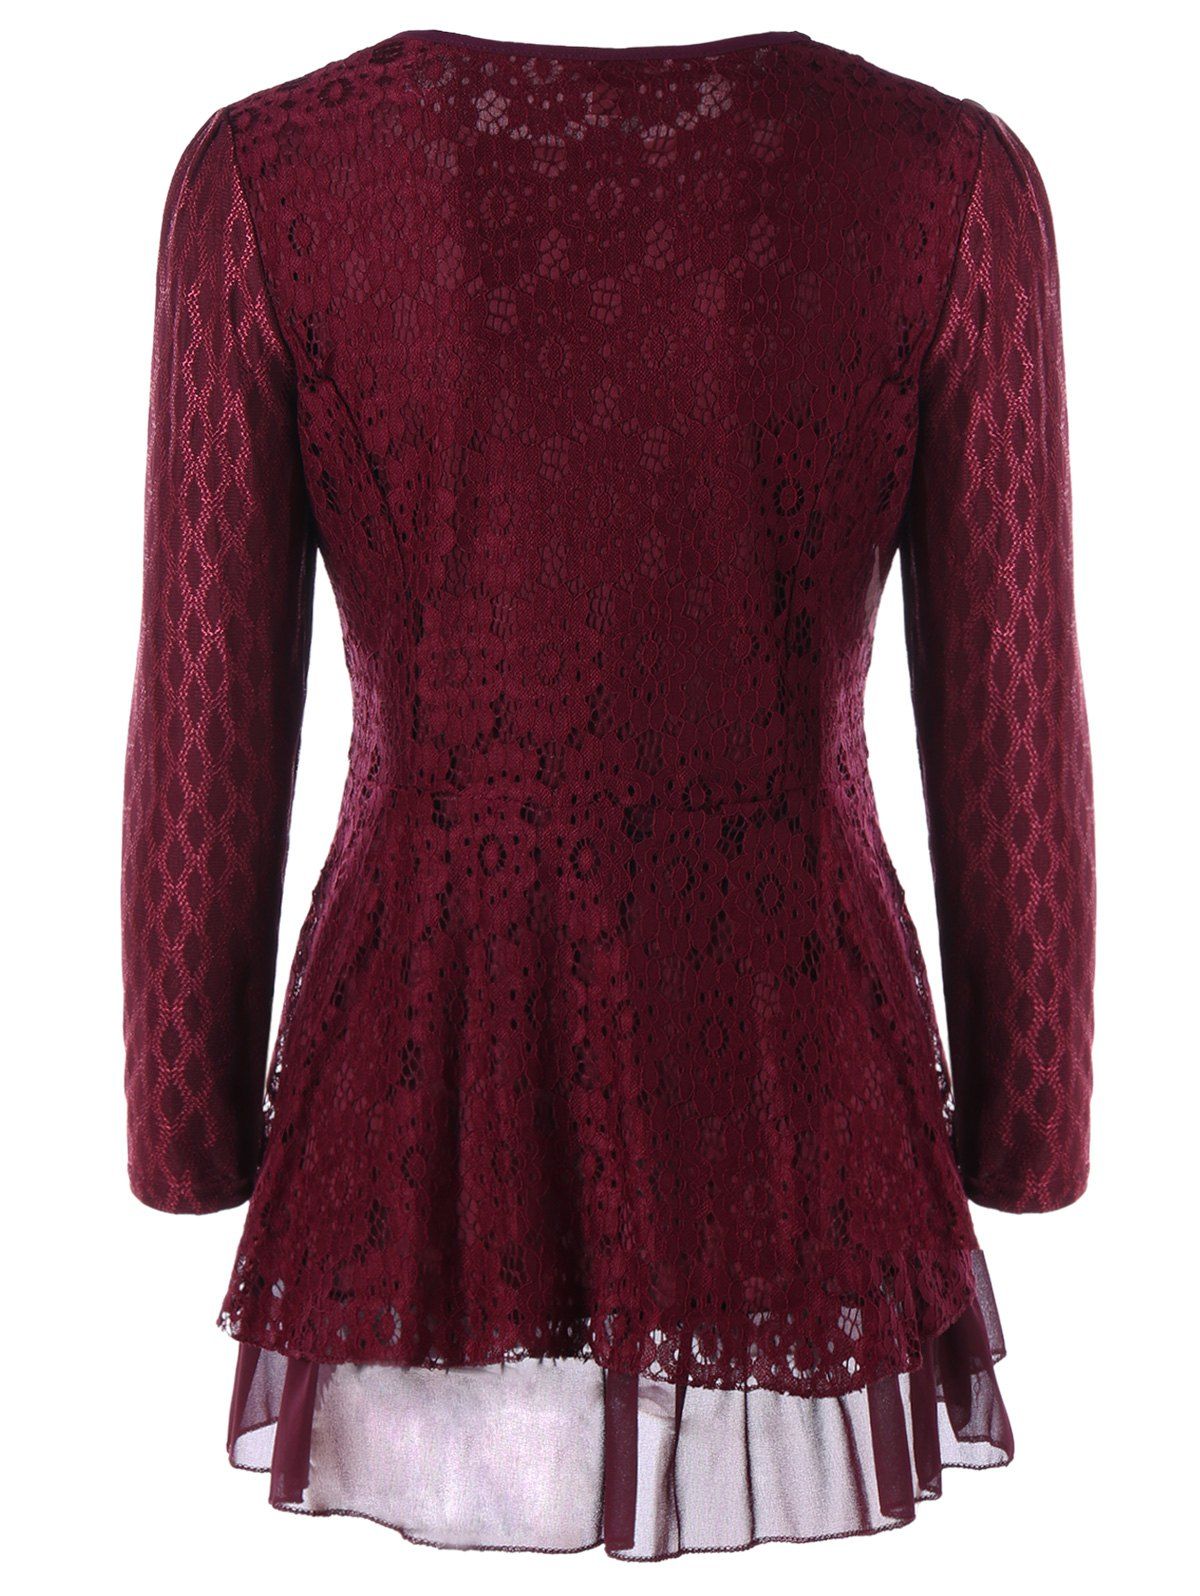 2018 Plus Size Embellished Layered Lace Peplum Top WINE RED XL In Tank ...